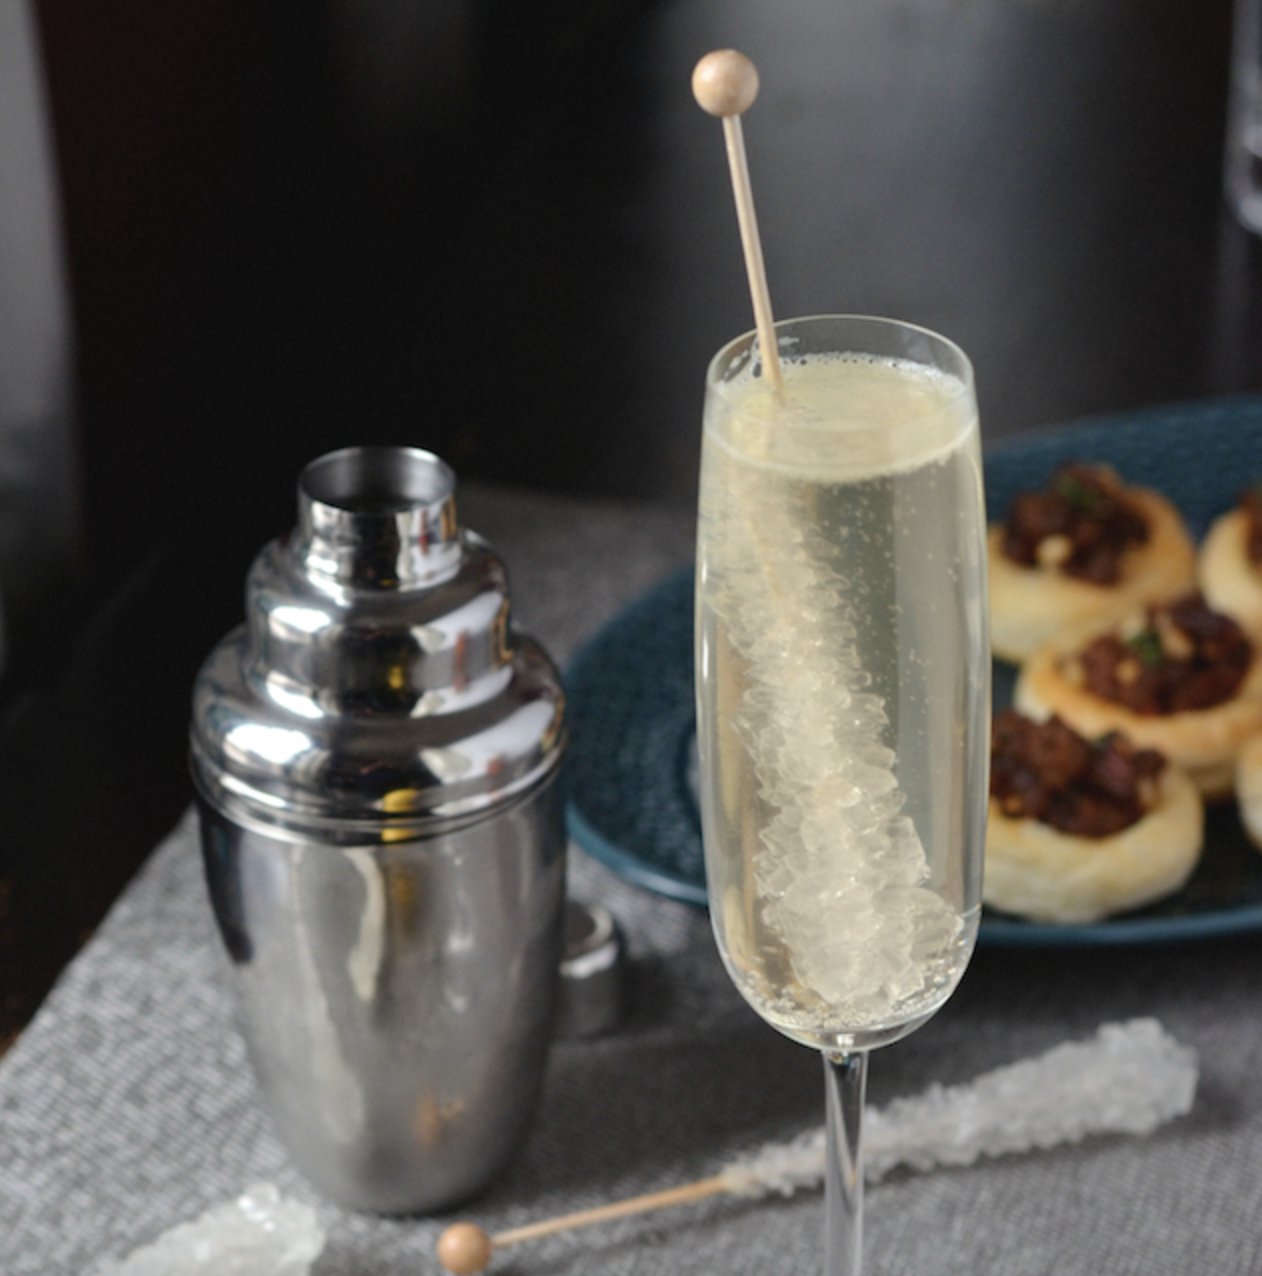 A non-alcoholic French 75 in a champagne glass